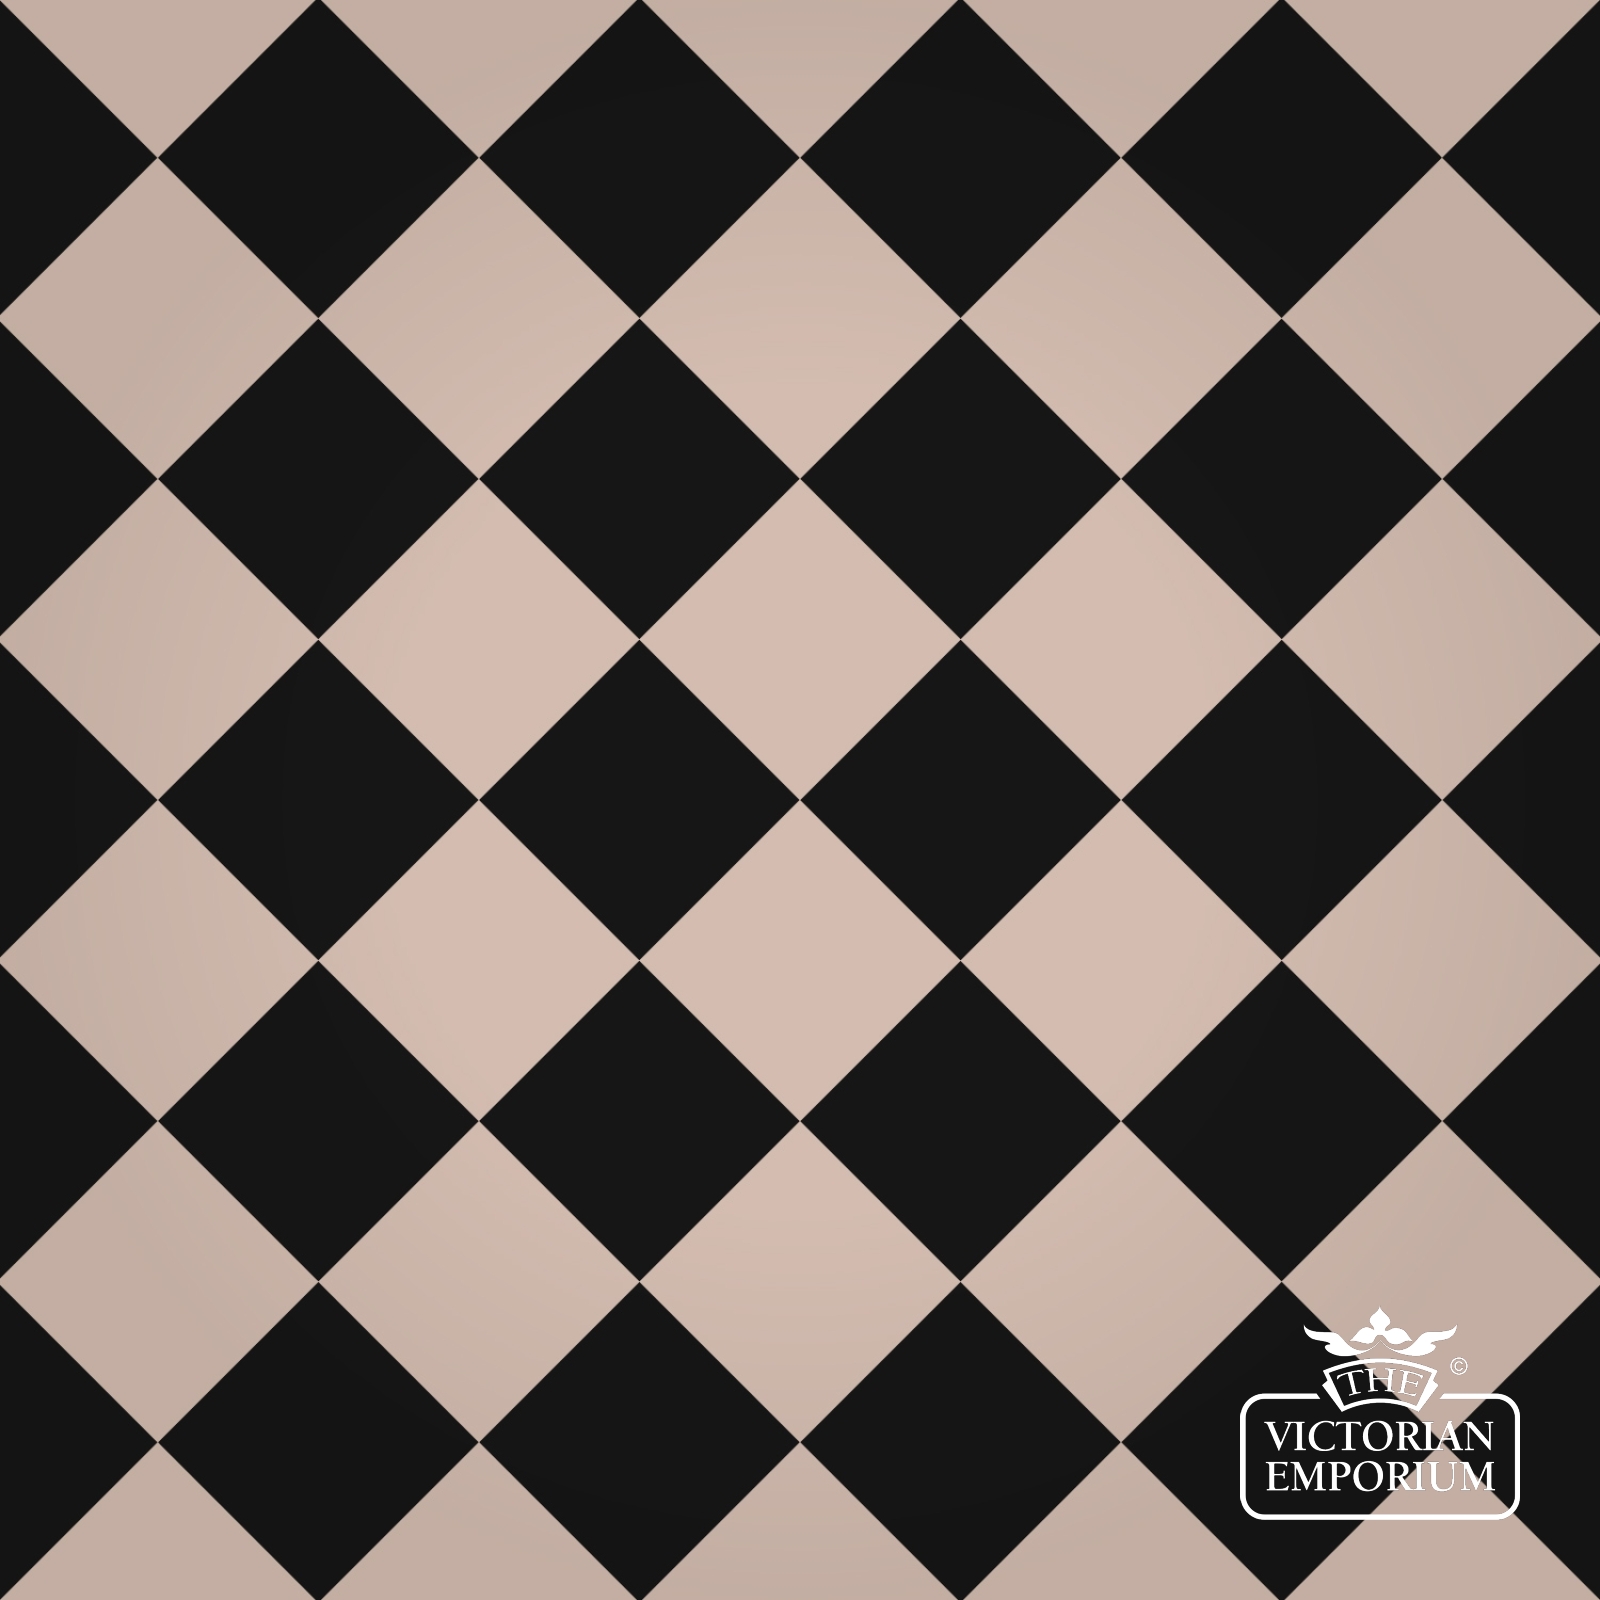 Victorian Path tiles - Black and Light Pink 10cm x 10cm squares (suitable for outdoor use)